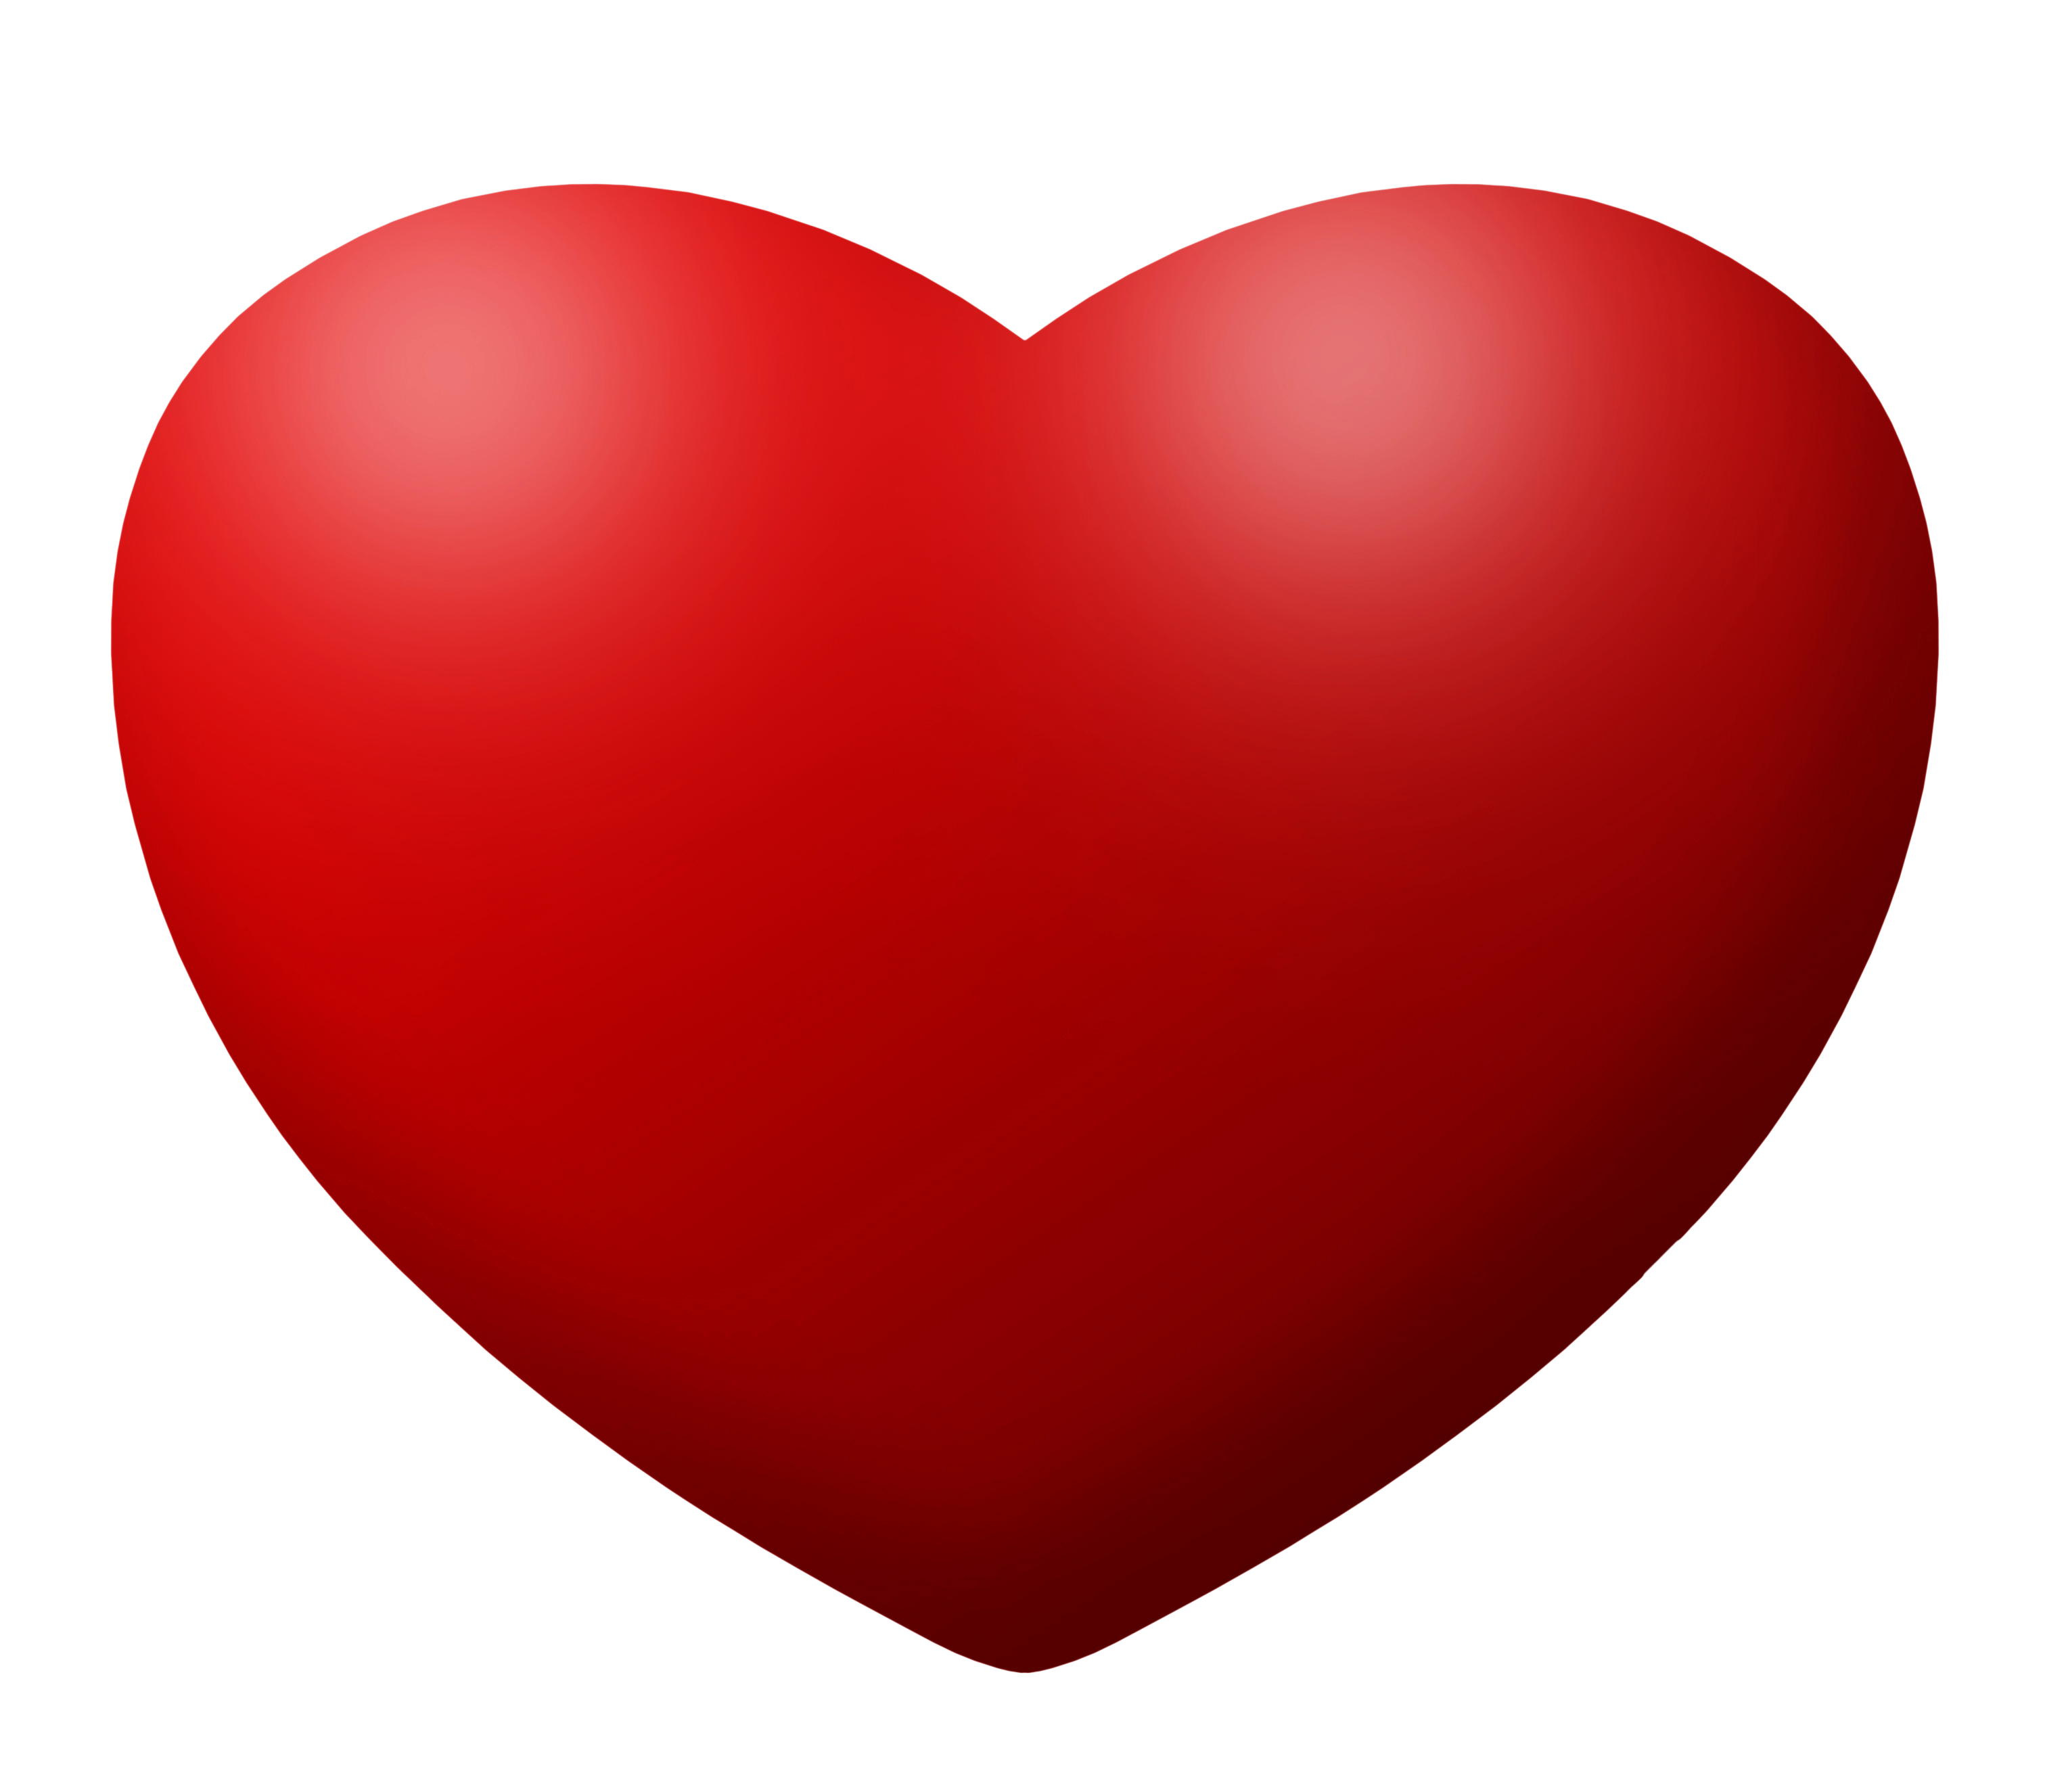 Heart PNG Image in High Definition Transparent